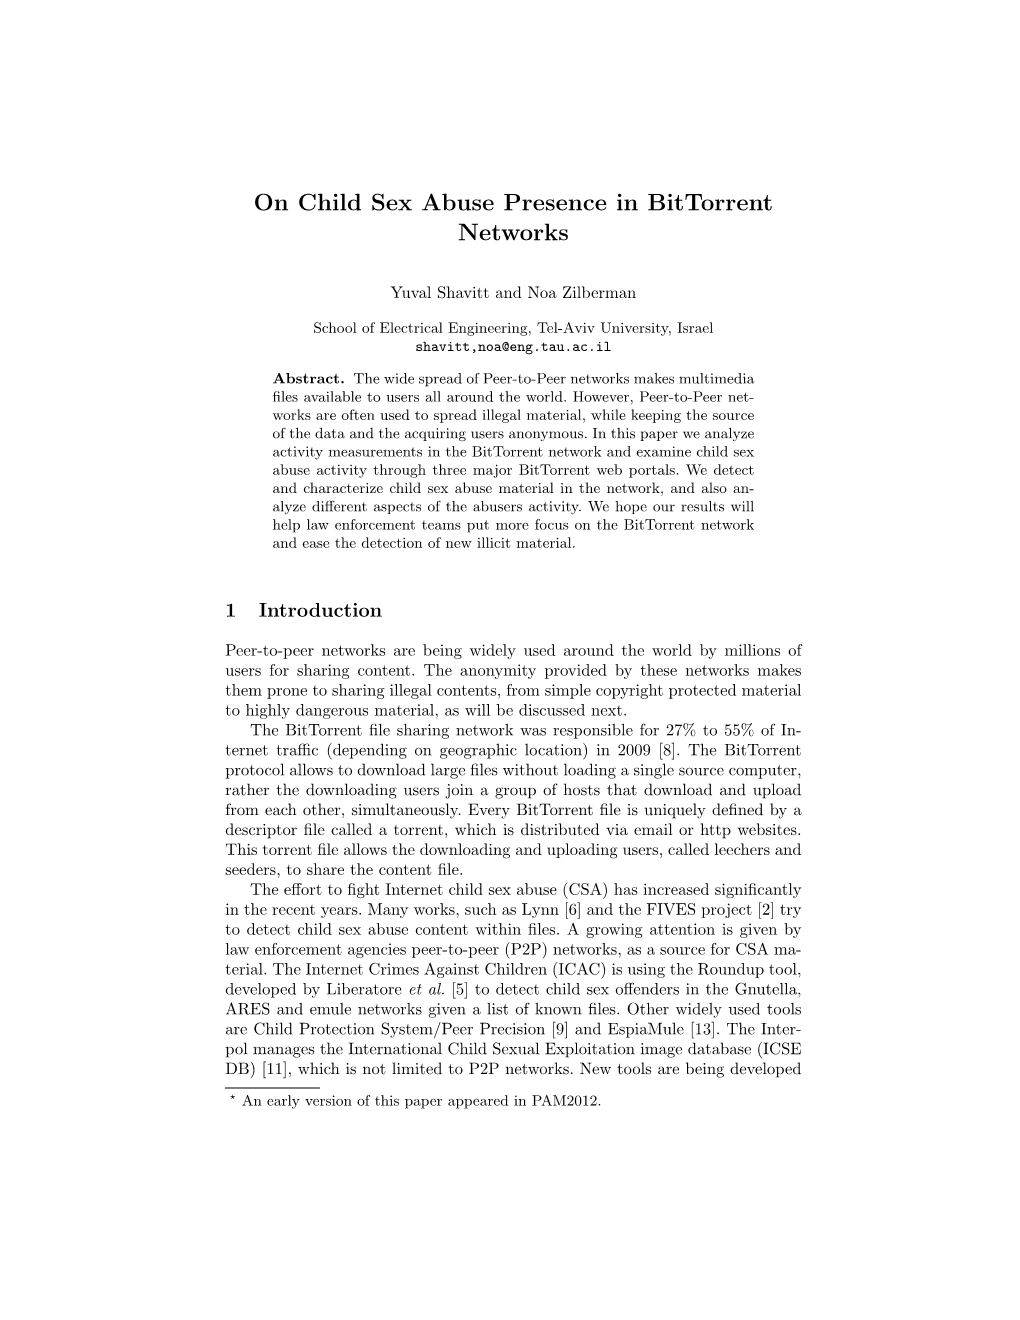 On Child Sex Abuse Presence in Bittorrent Networks